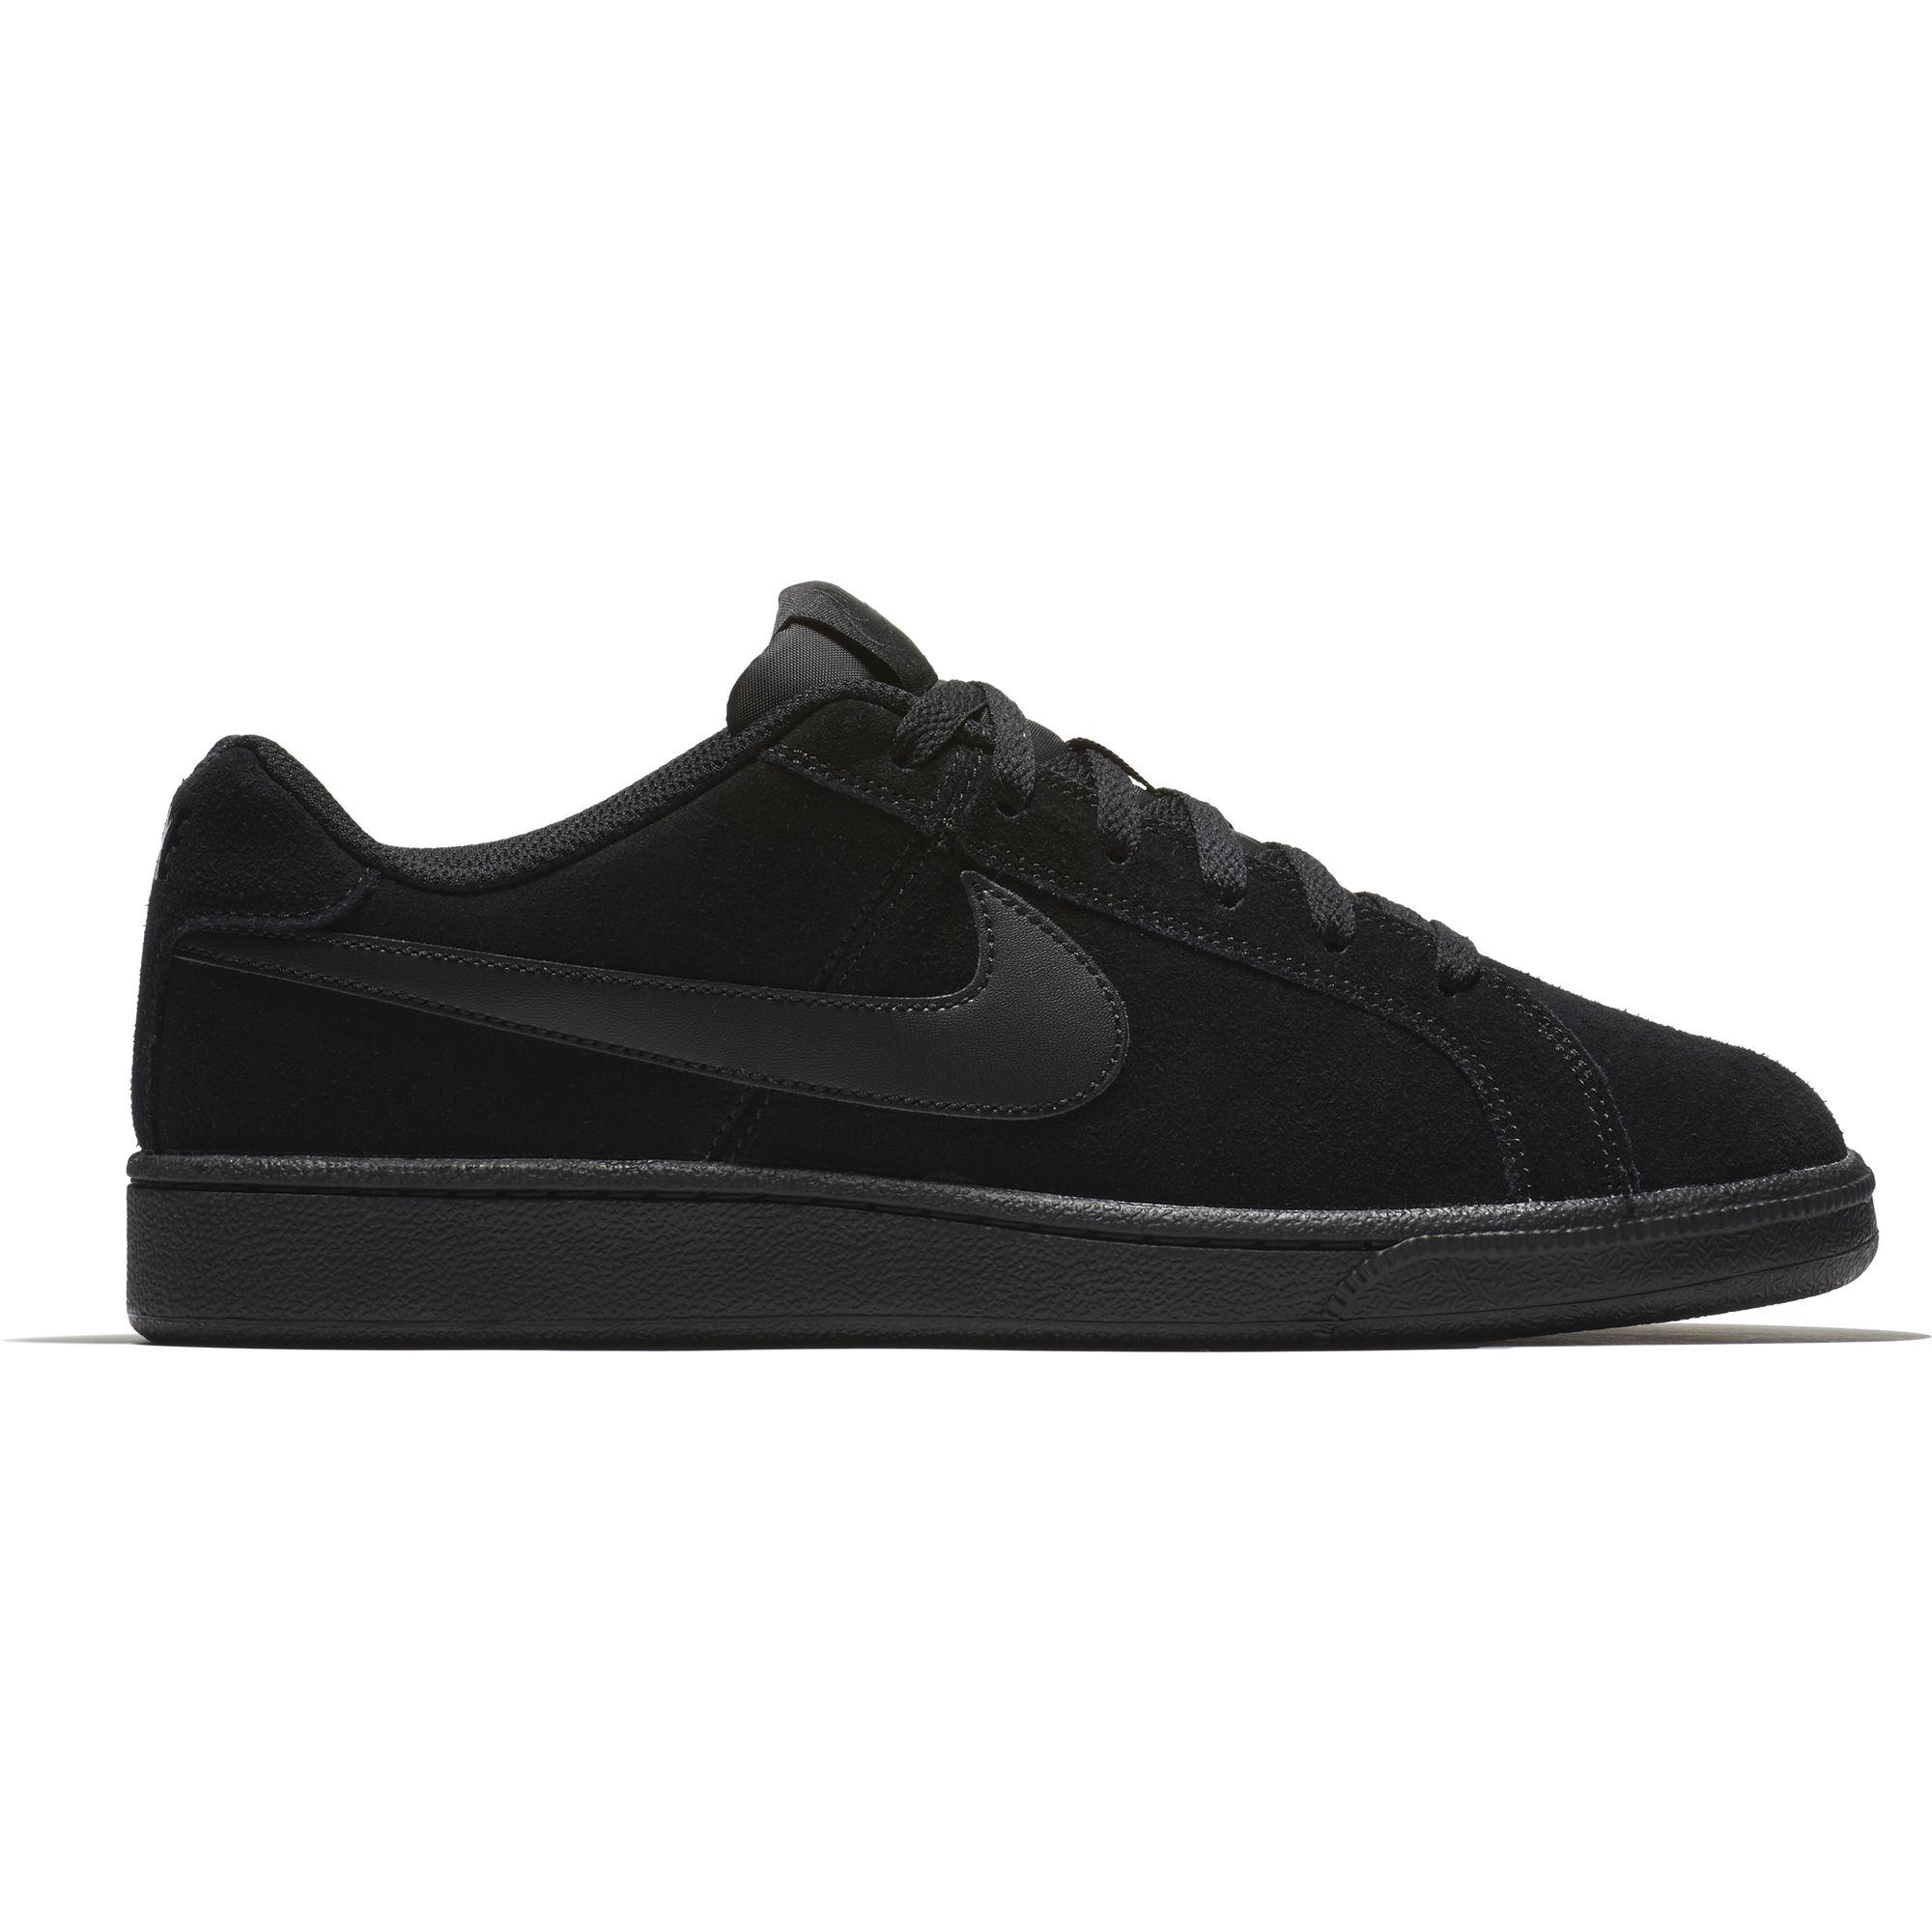 Nike Mens Court Royale Suede Tennis 